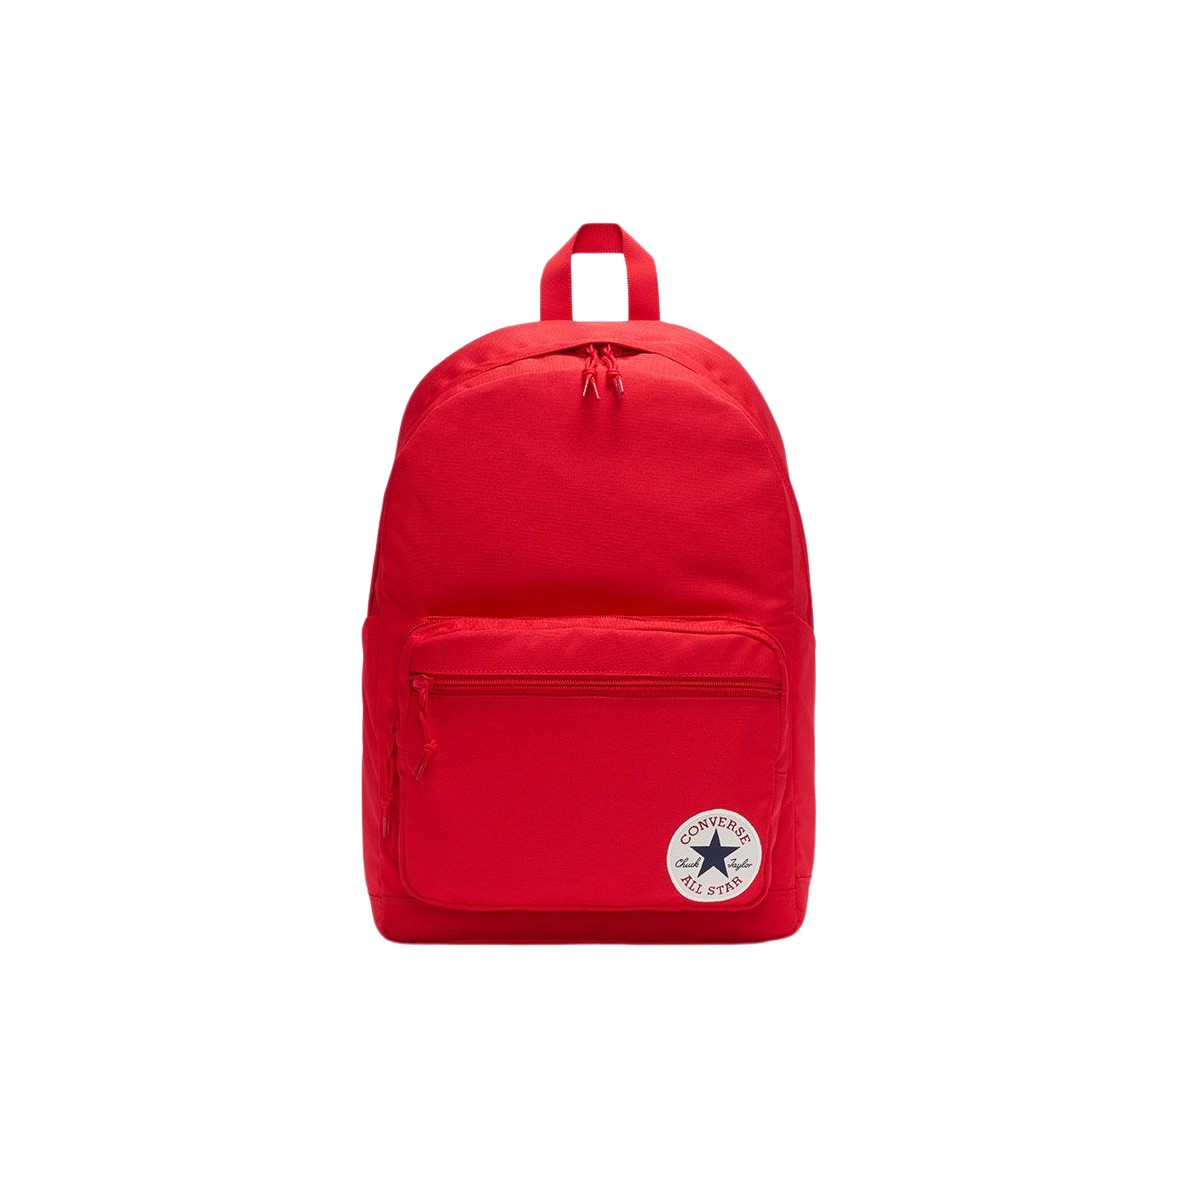 Go 2 Backpack in Red